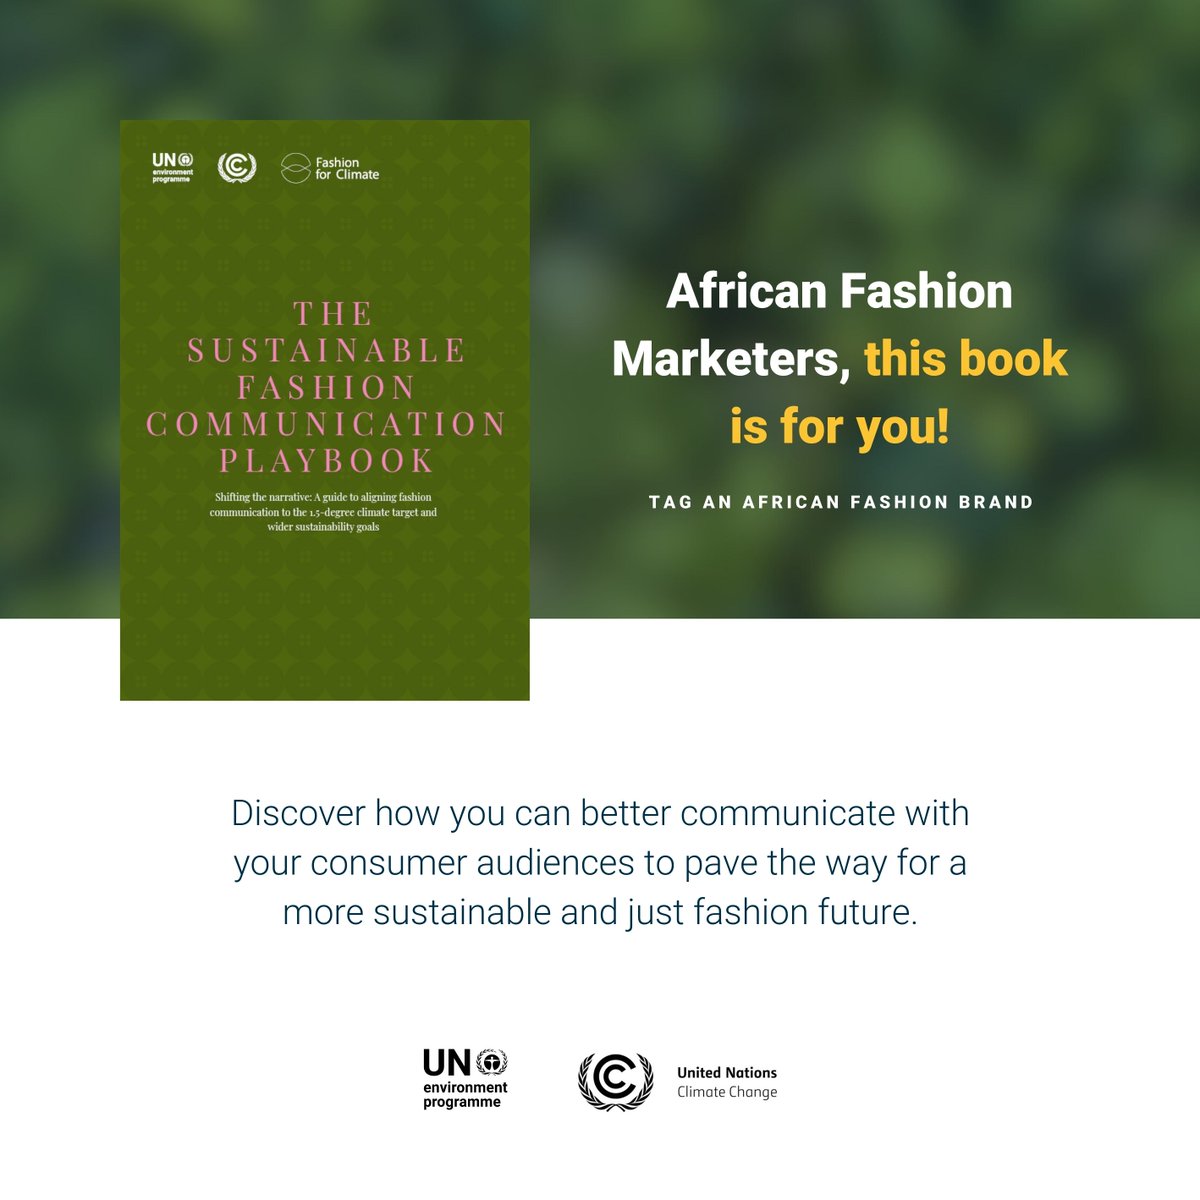 Calling all African fashion brands! 📢🌍

The Sustainable Fashion Communication Playbook is a must-read! Discover how to align your fashion communication with sustainability targets.

Tag an African Fashion brand and join the movement . #FashionMarketing